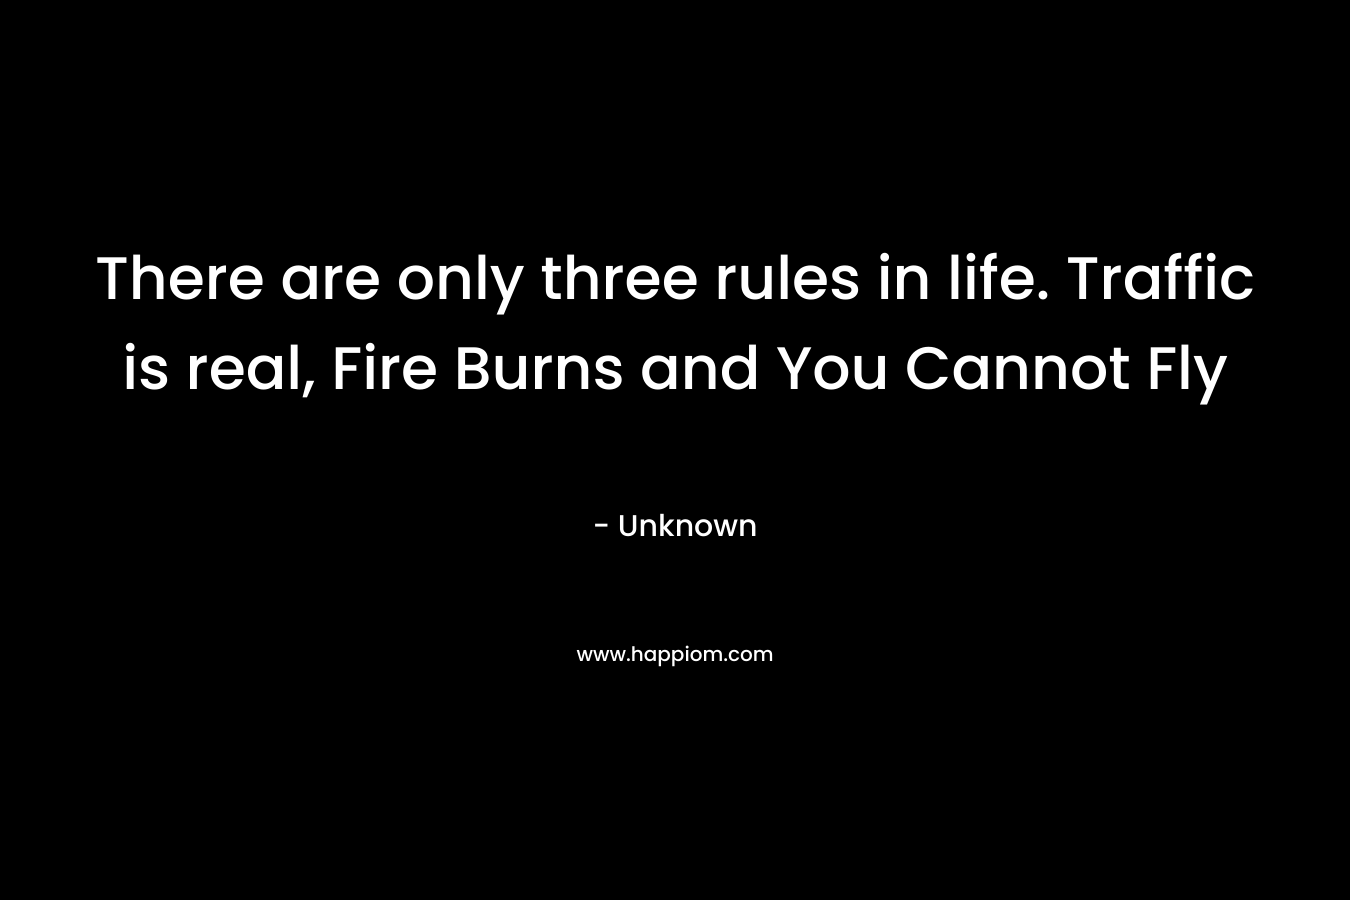 There are only three rules in life. Traffic is real, Fire Burns and You Cannot Fly